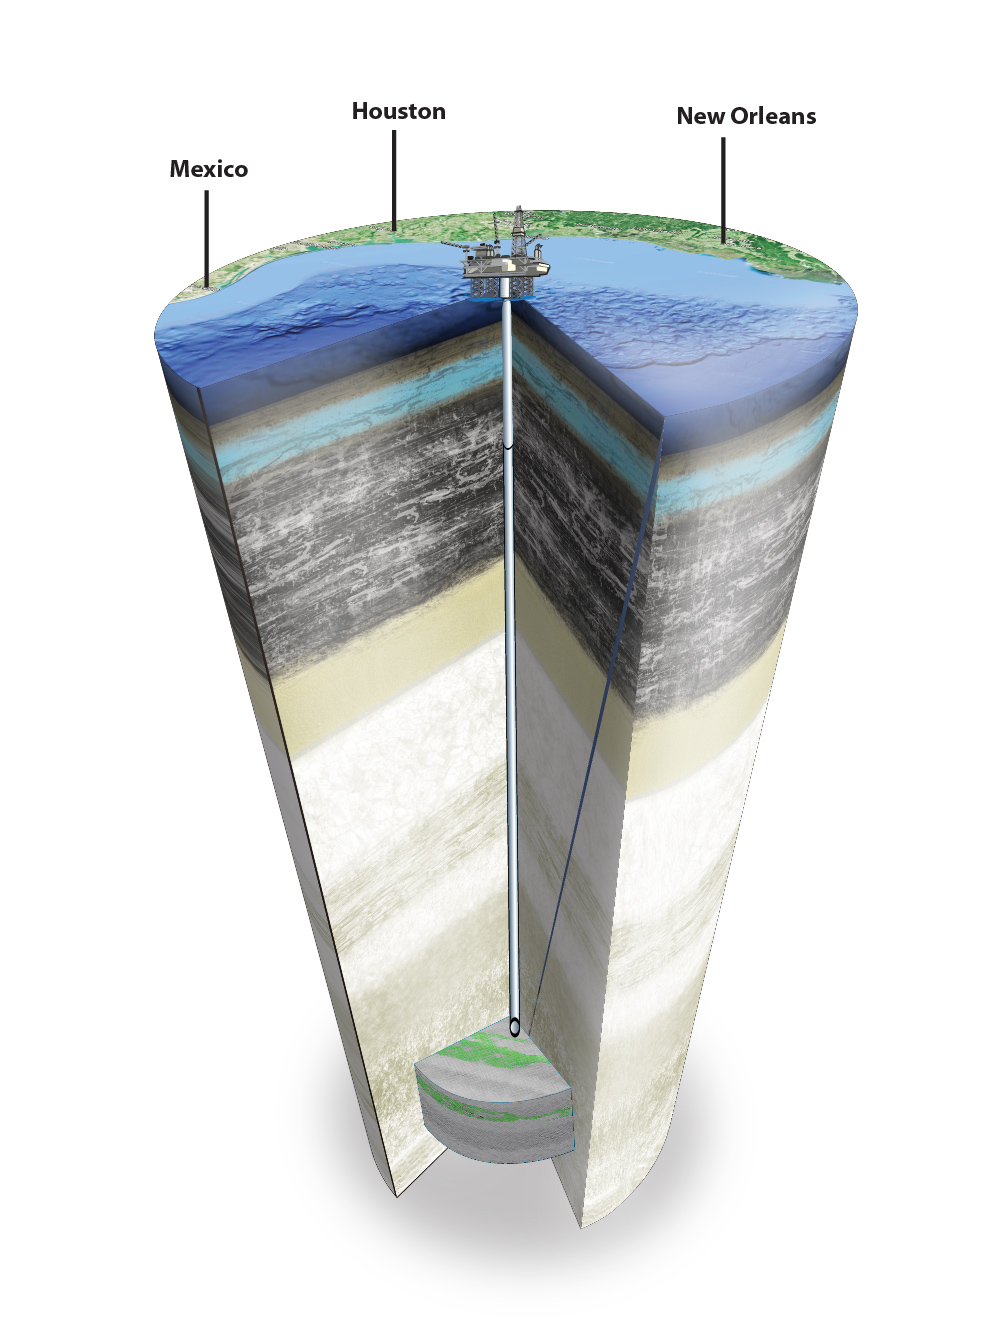 Illustration of geologic offshore carbon sequestration